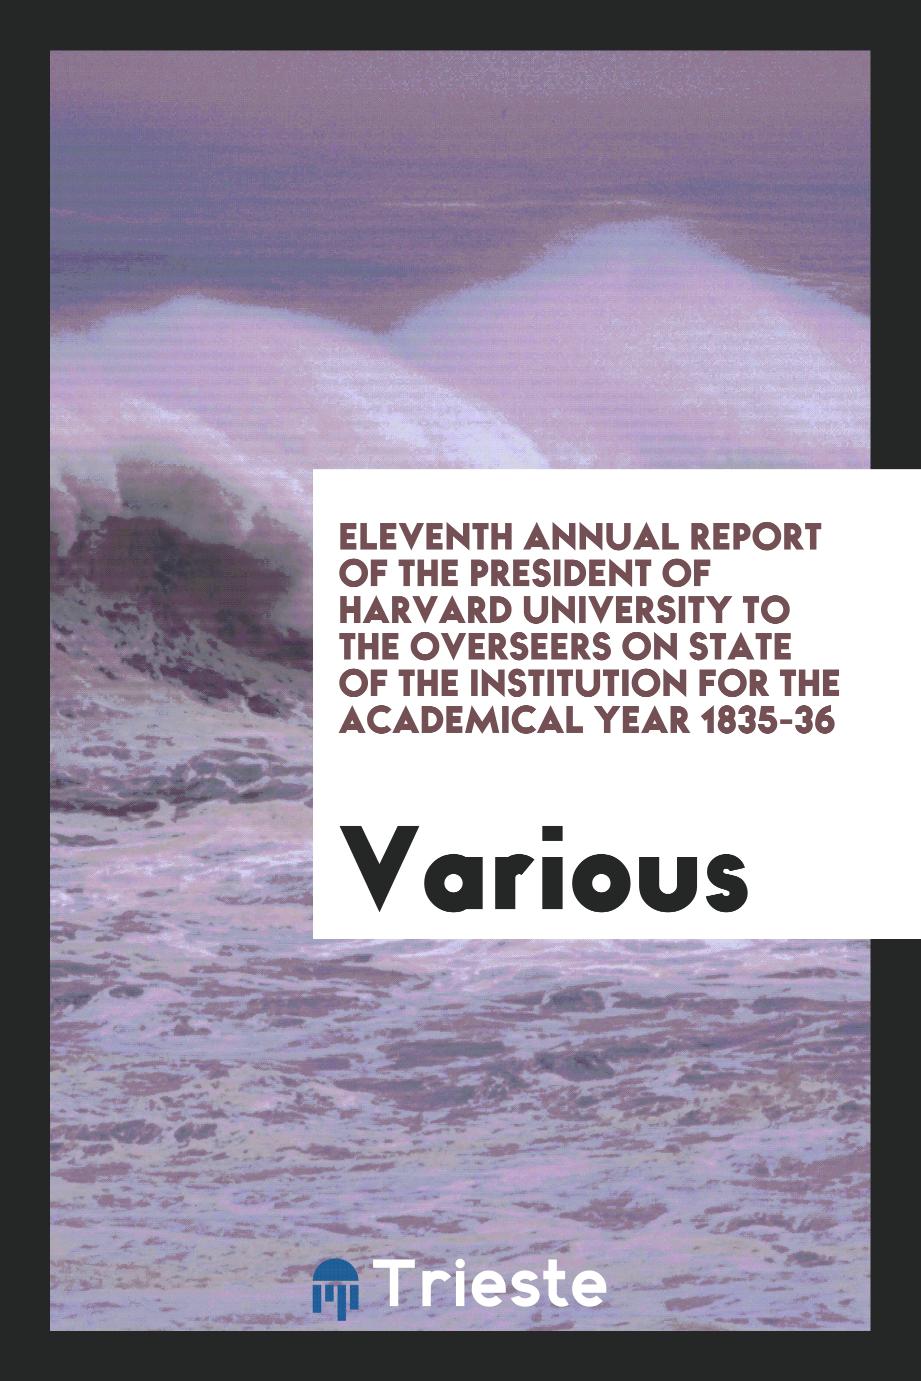 Eleventh Annual Report of the President of Harvard University to the Overseers on State of the Institution for the Academical year 1835-36